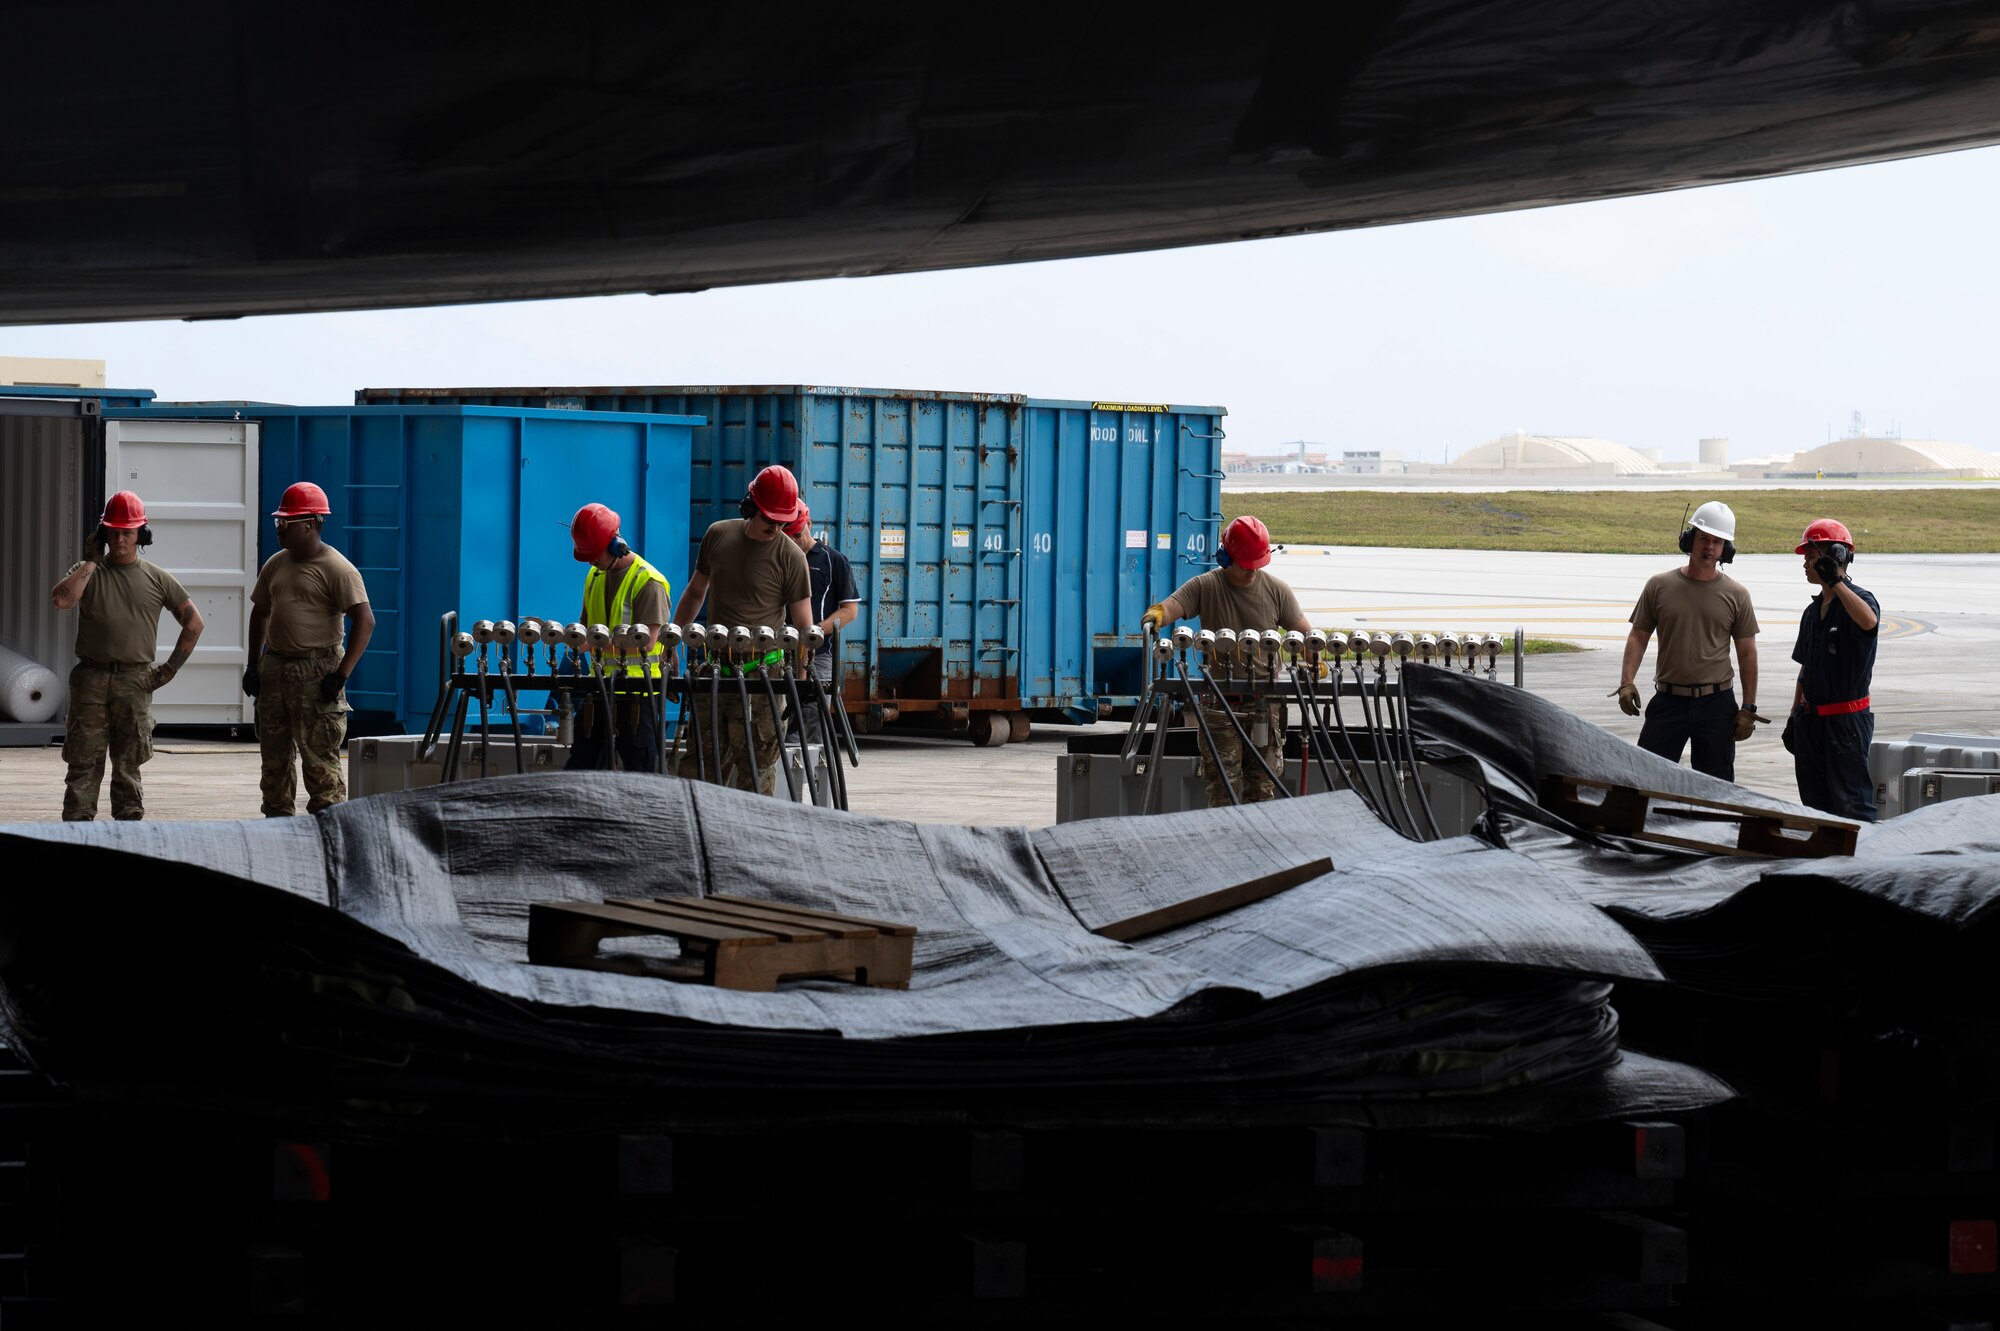 U.S. Air Force Airmen with the 36th Maintenance Squadron prepare to lift an A310 aircraft by inflating low pressure heavy aircraft lifting bags with pressure manifold modules on Andersen Air Force Base, Guam, Feb. 22, 2024. The Airmen had to lift the aircraft so that contractors could use an excavator to demolish it due to unrepairable damages. (U.S. Air Force Photo by Airman 1st Class Spencer Perkins)